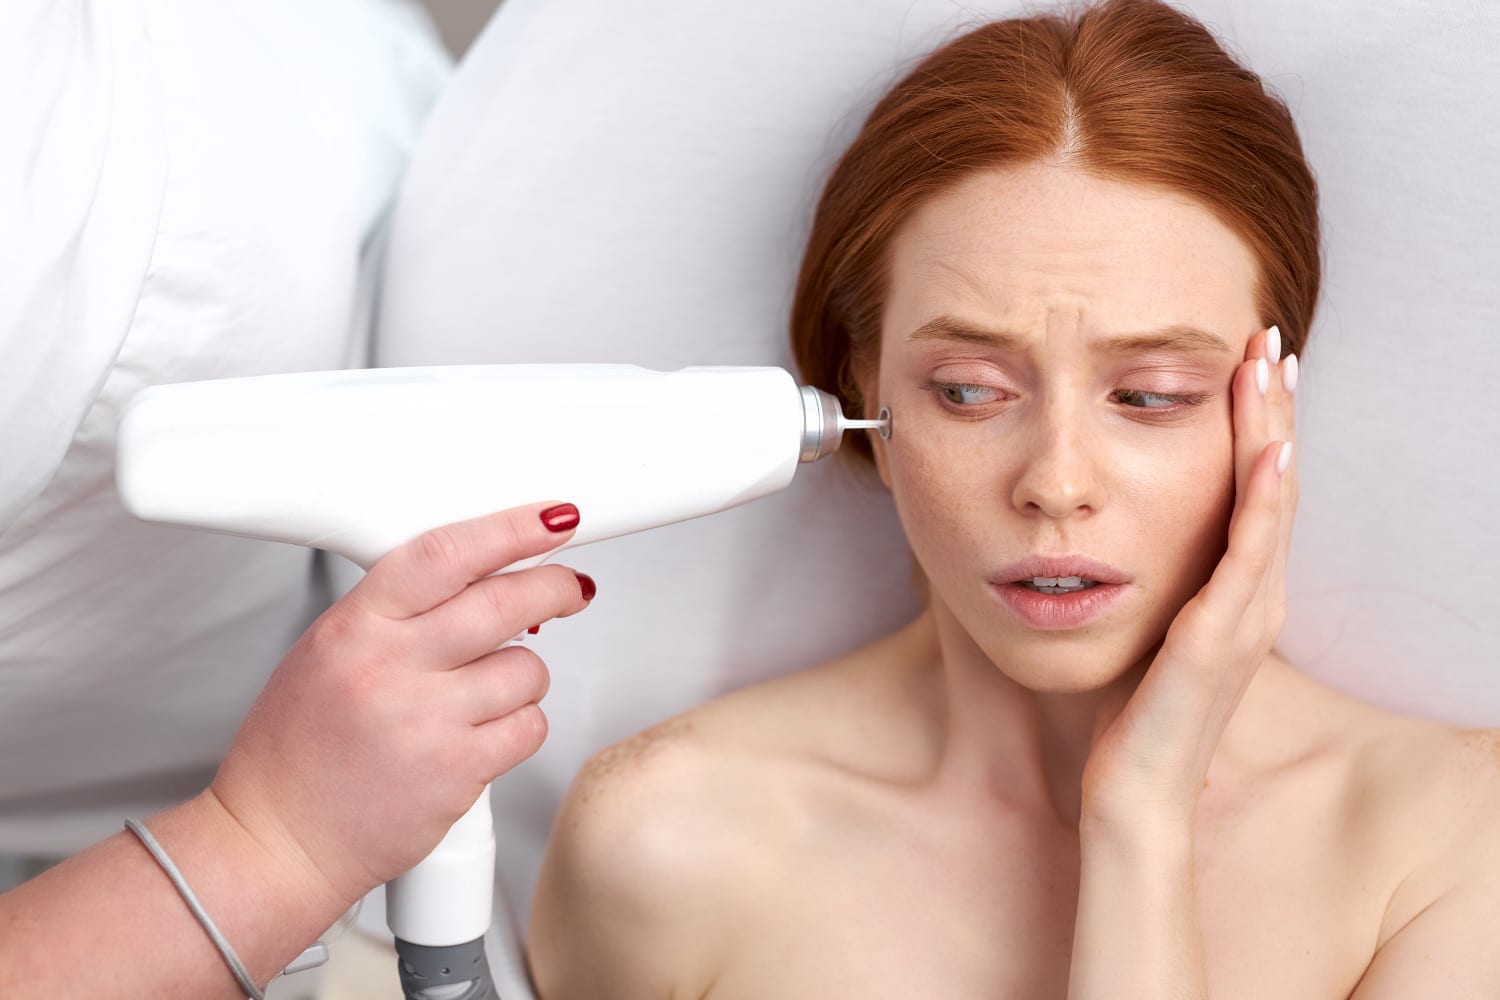 Red haired woman scared by laser treatment on face, looking at equipment.